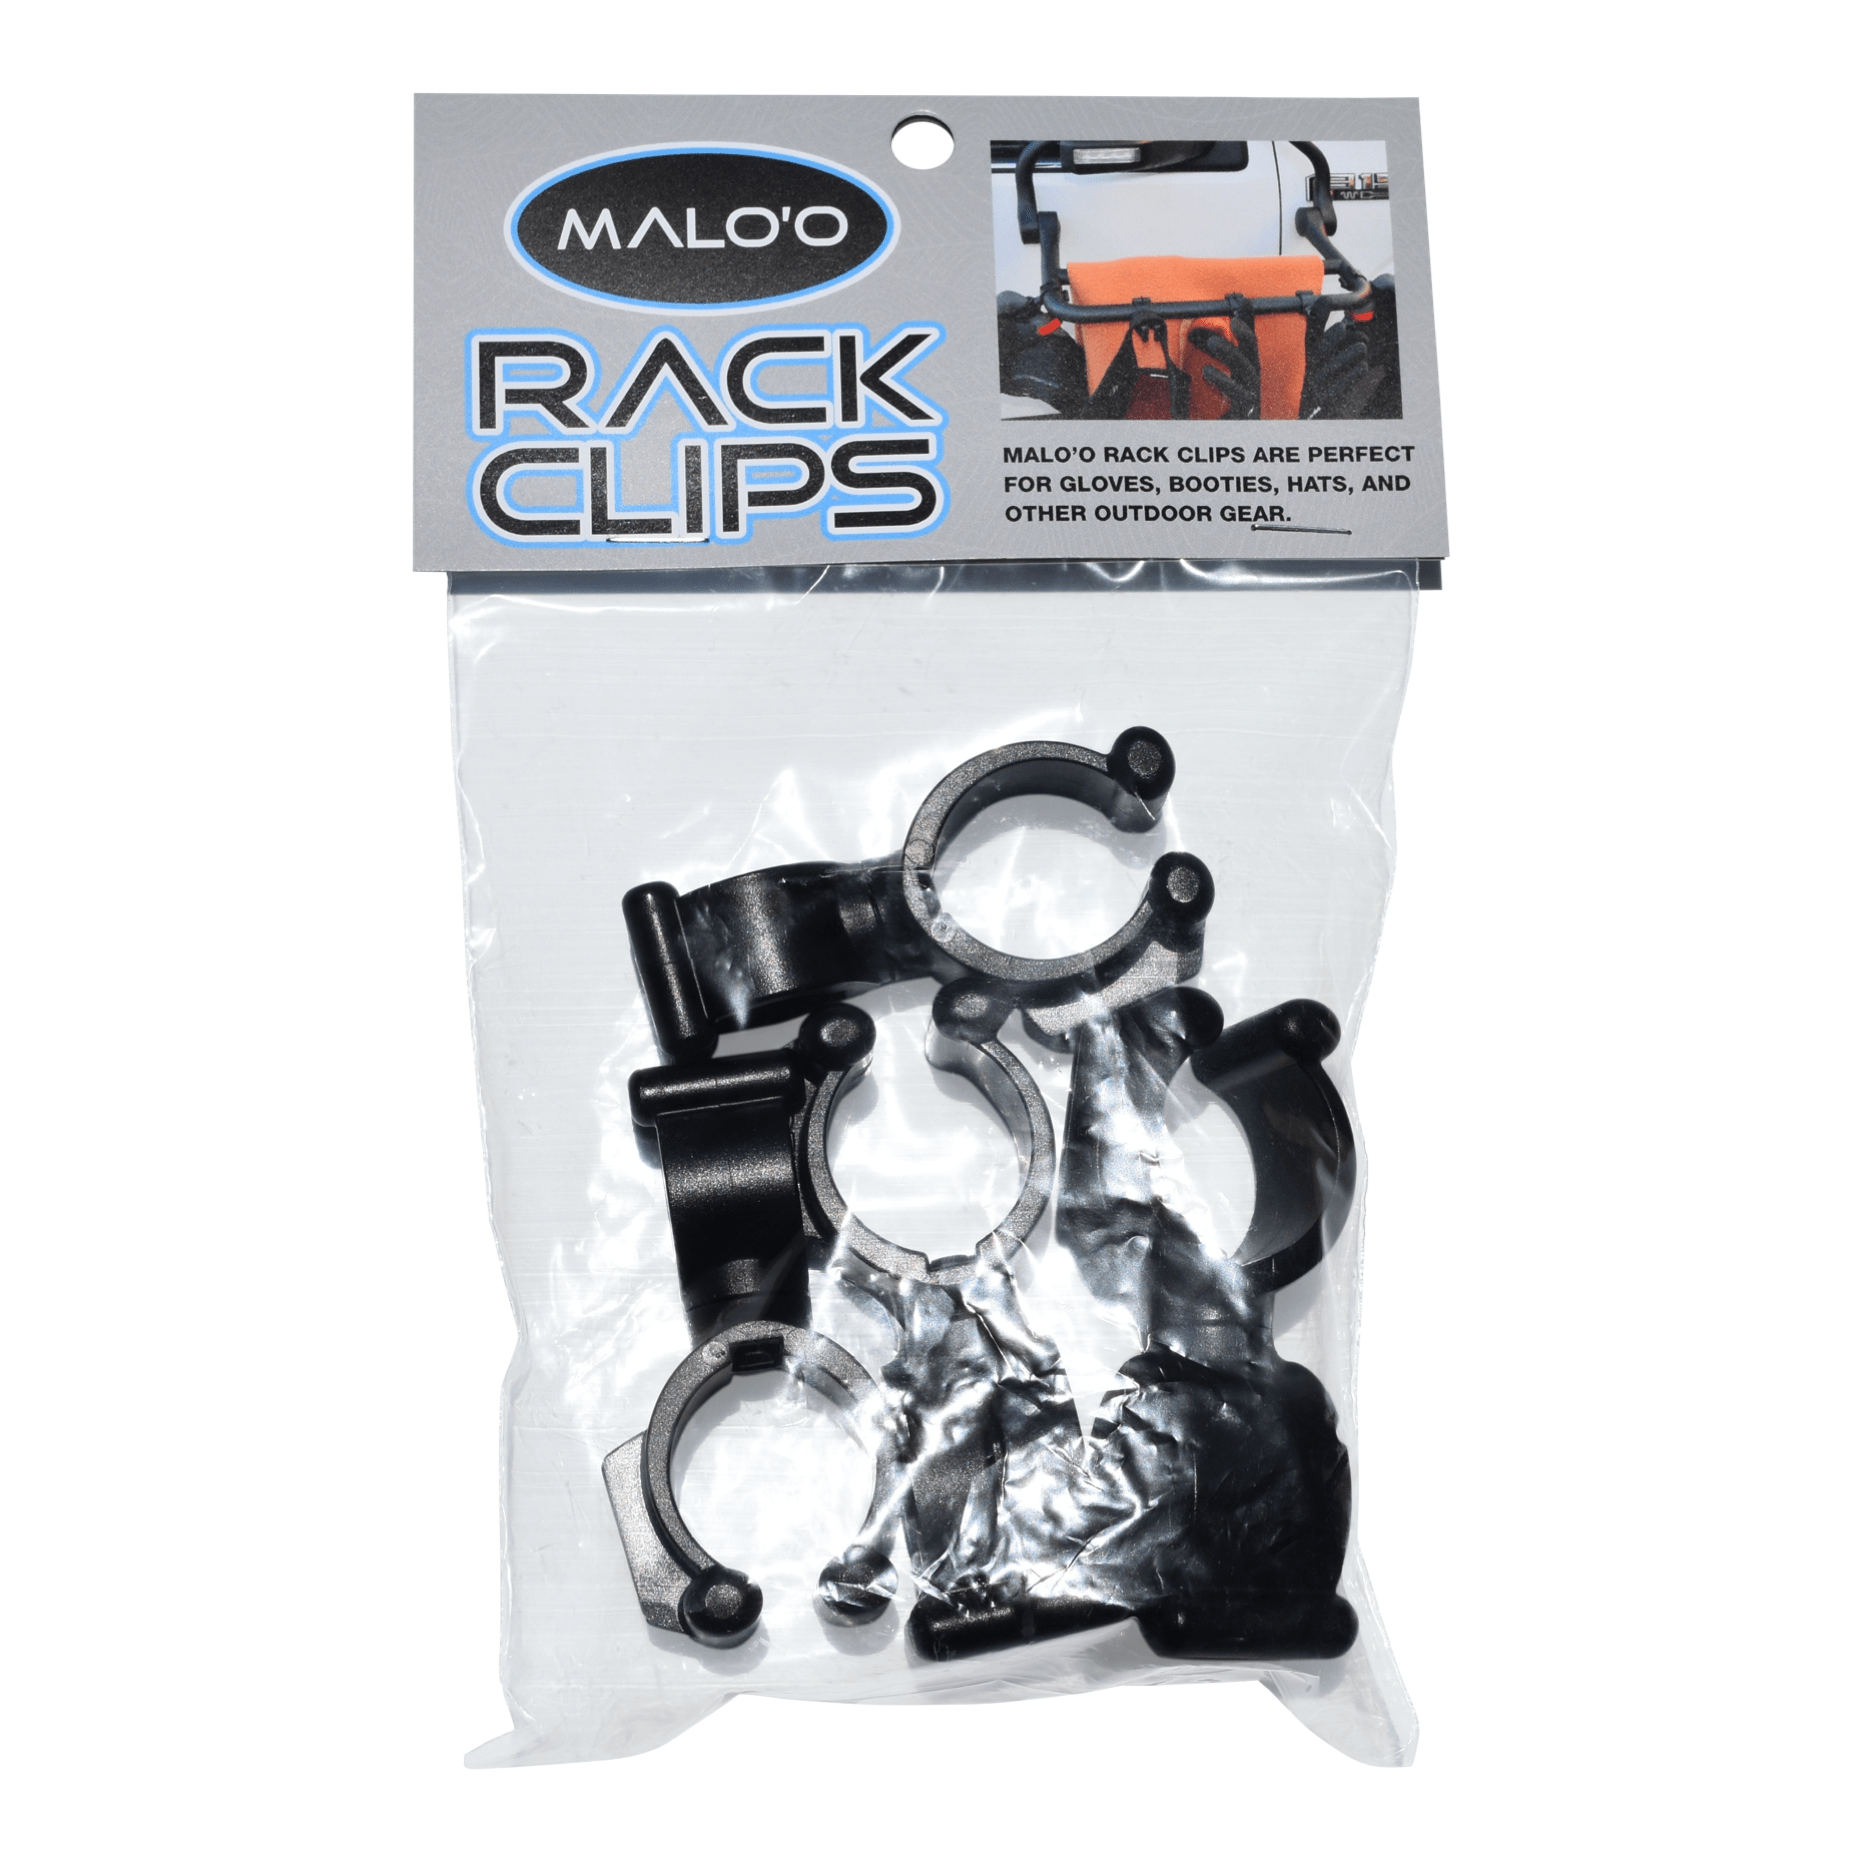 Malo'o Dry Rack Fishing Rod Holder Accessory Pack